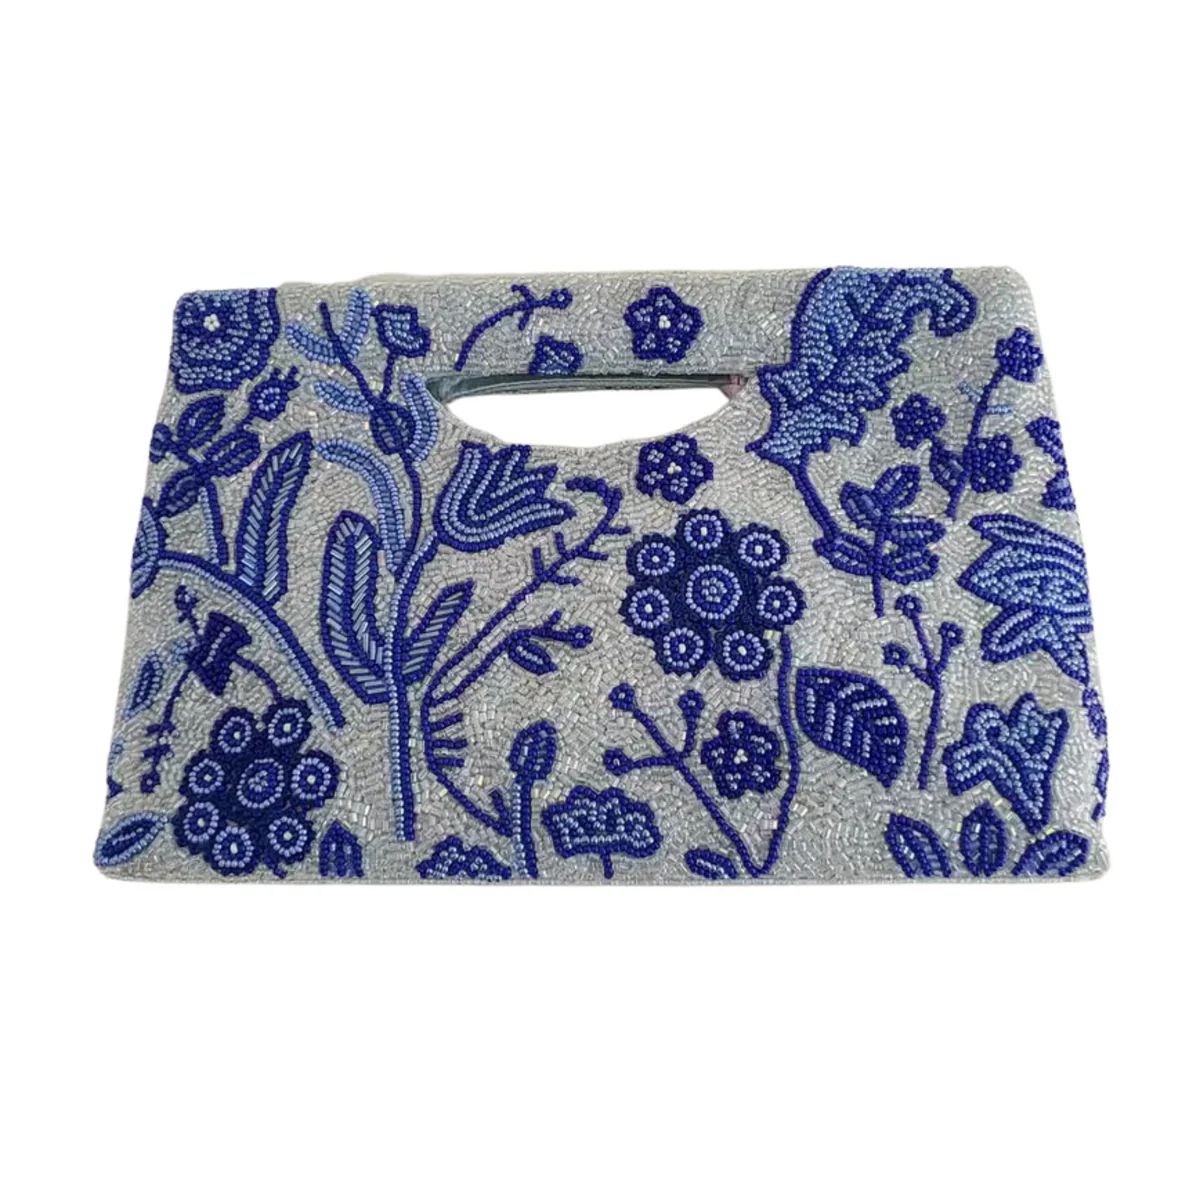 Fully Beaded Blue & White Floral Motif Clutch | The Well Appointed House, LLC